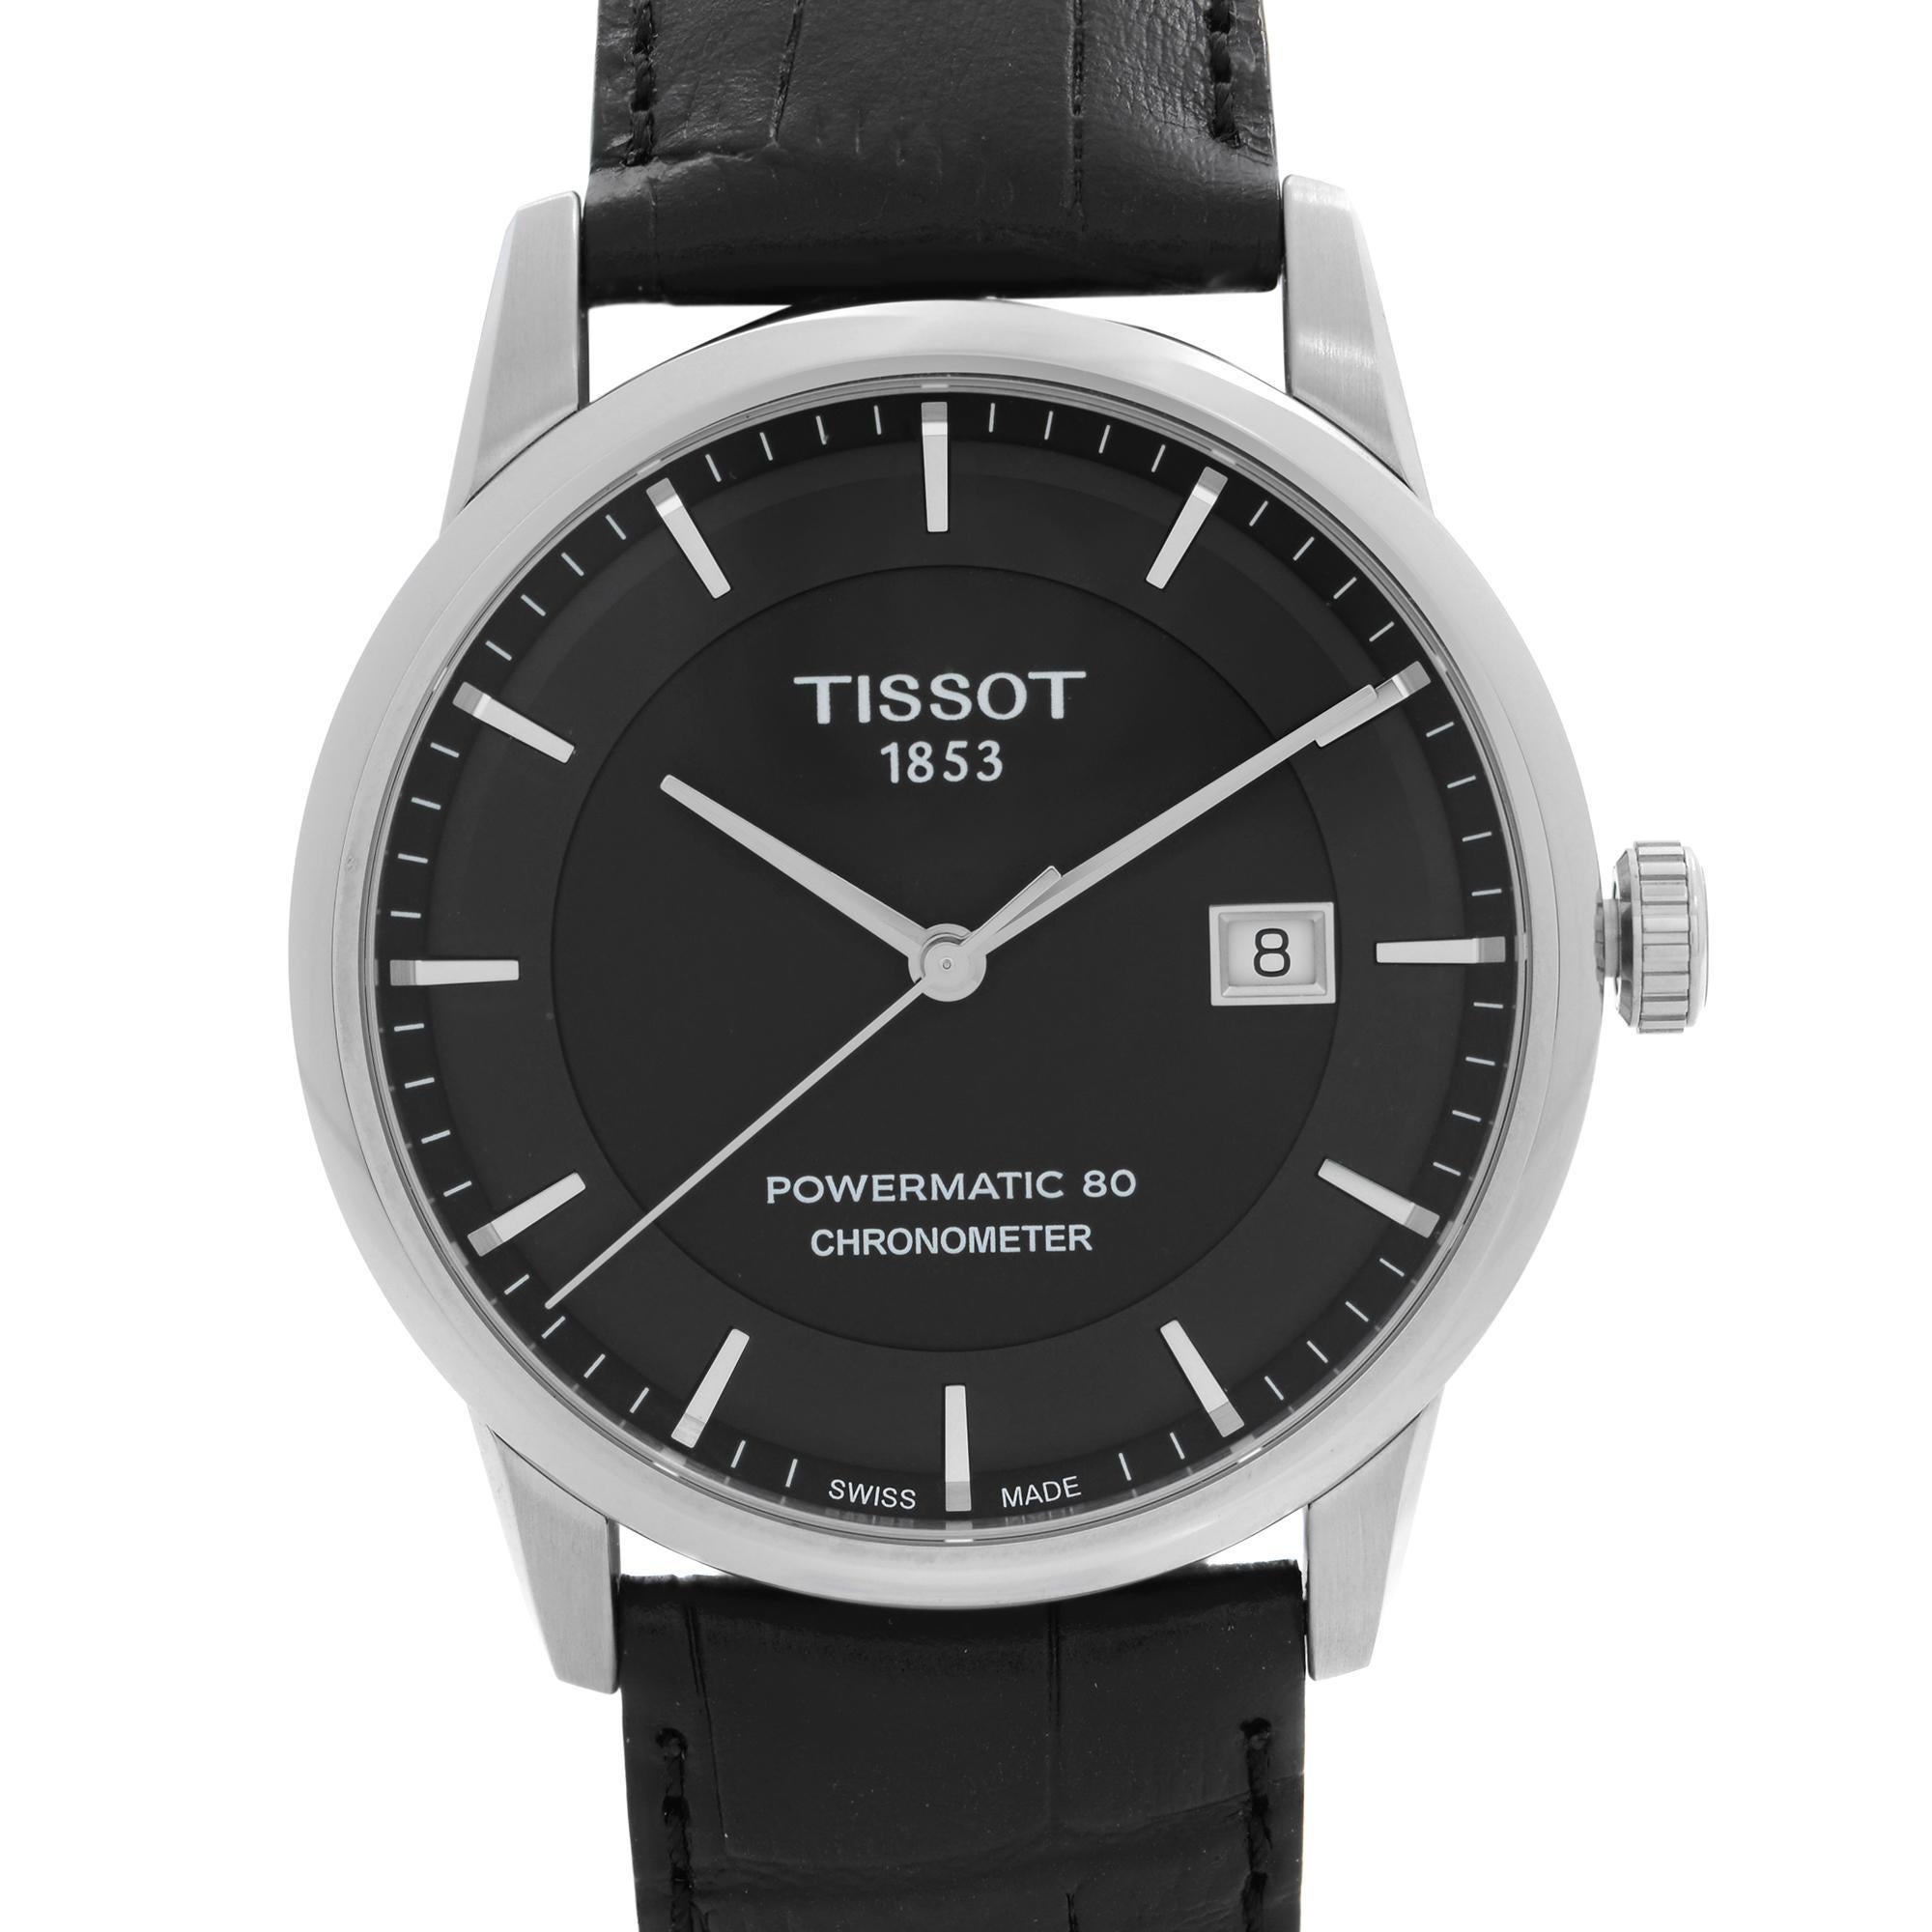 New with Defects Tissot T-Classic Automatic Watch T086.408.16.051.00. The Band has a little cracks on the inner side. This timepiece is powered by Mechanical (automatic) movement with a Power reserve of 80 hours. Stainless Steel Case with a Black